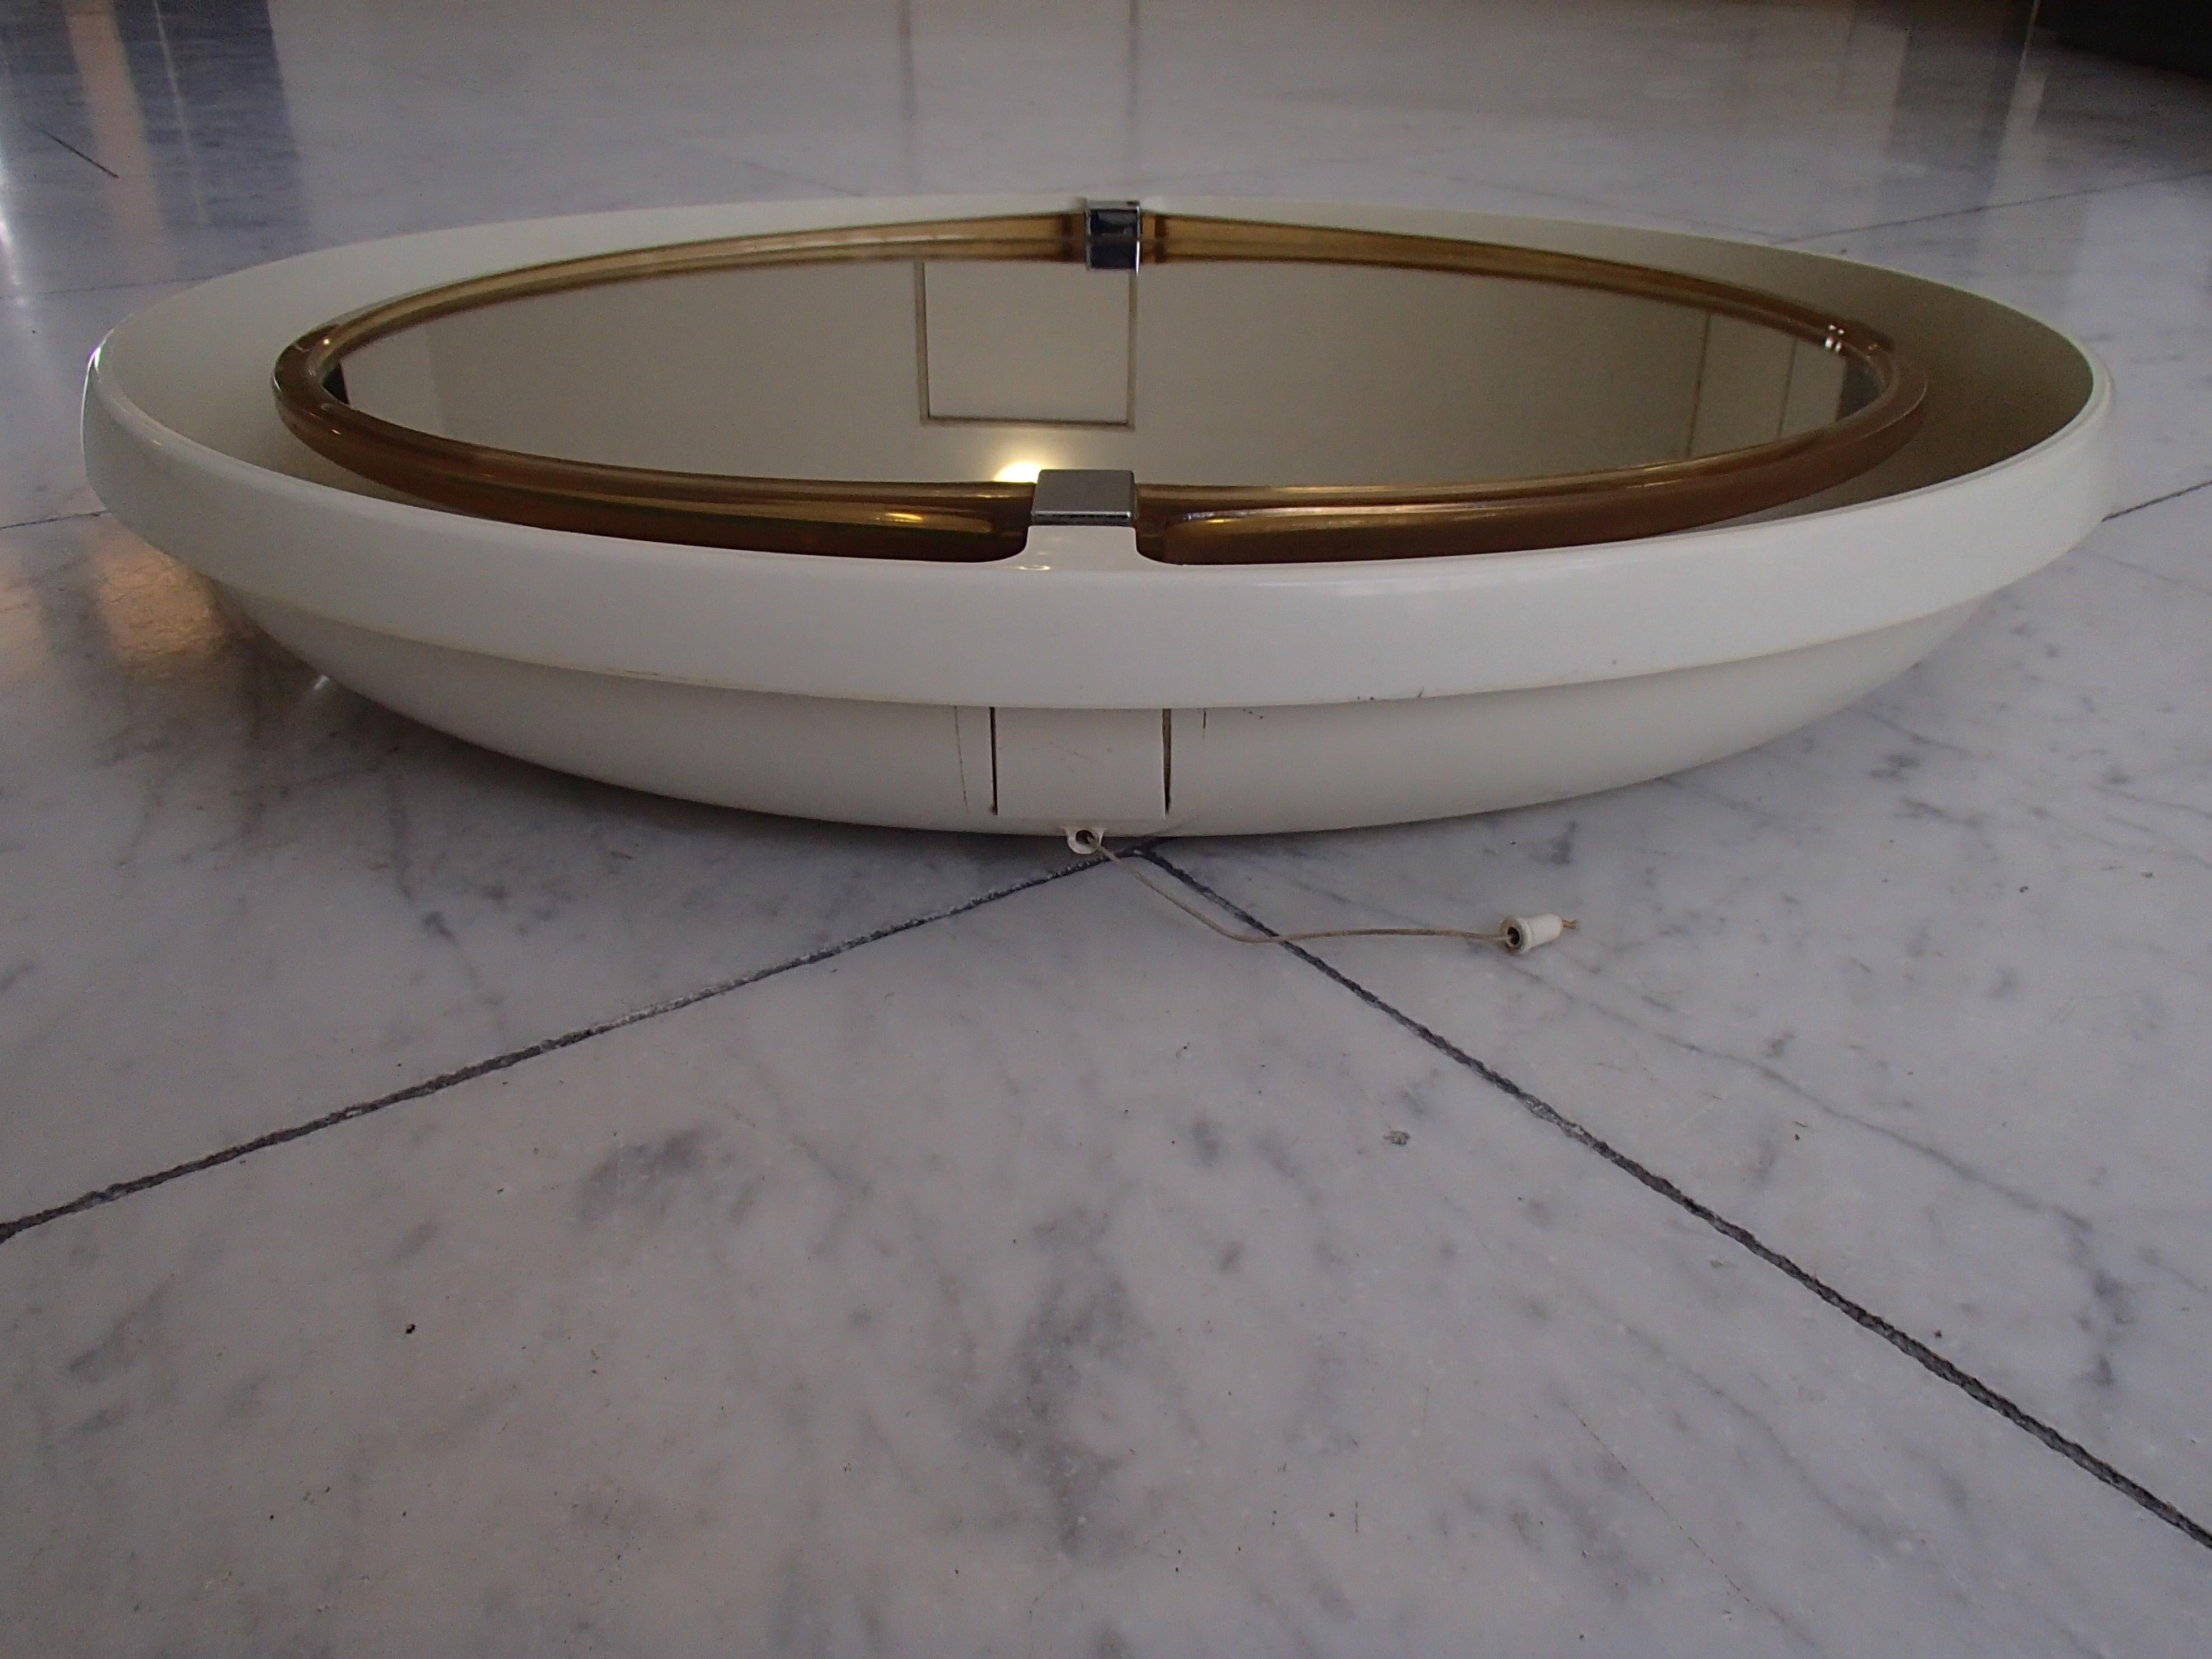 Pair of Midcentury Oval Movable Bathroom Mirrors with 4 Bulbs 1